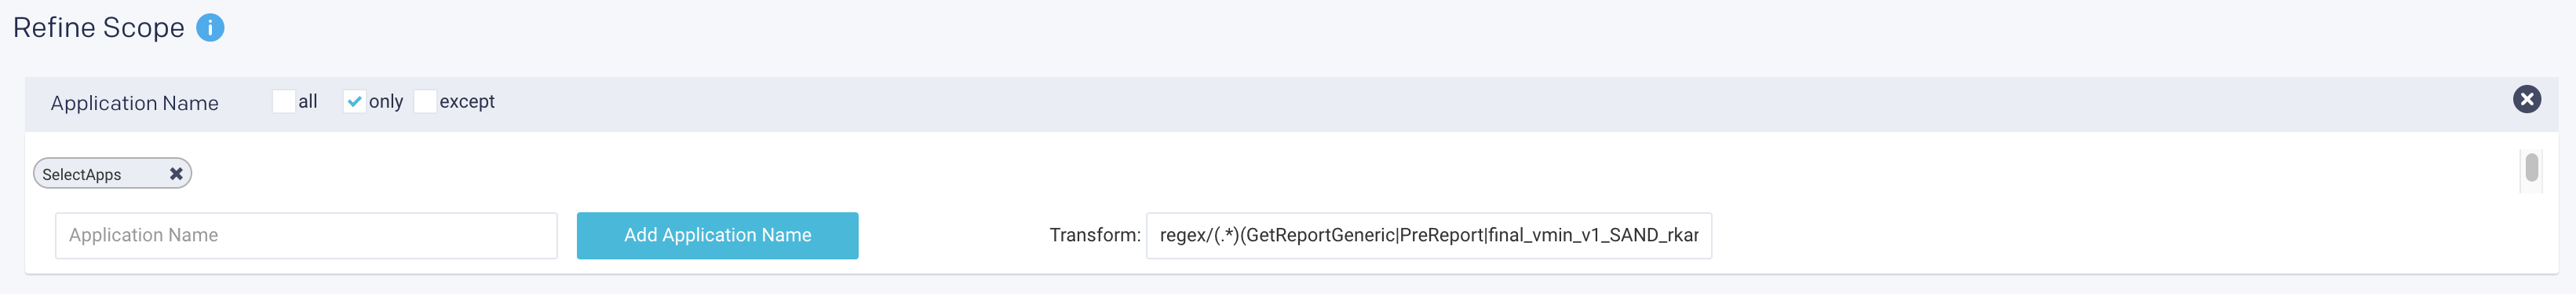 auto-actions-app-name-regex.png